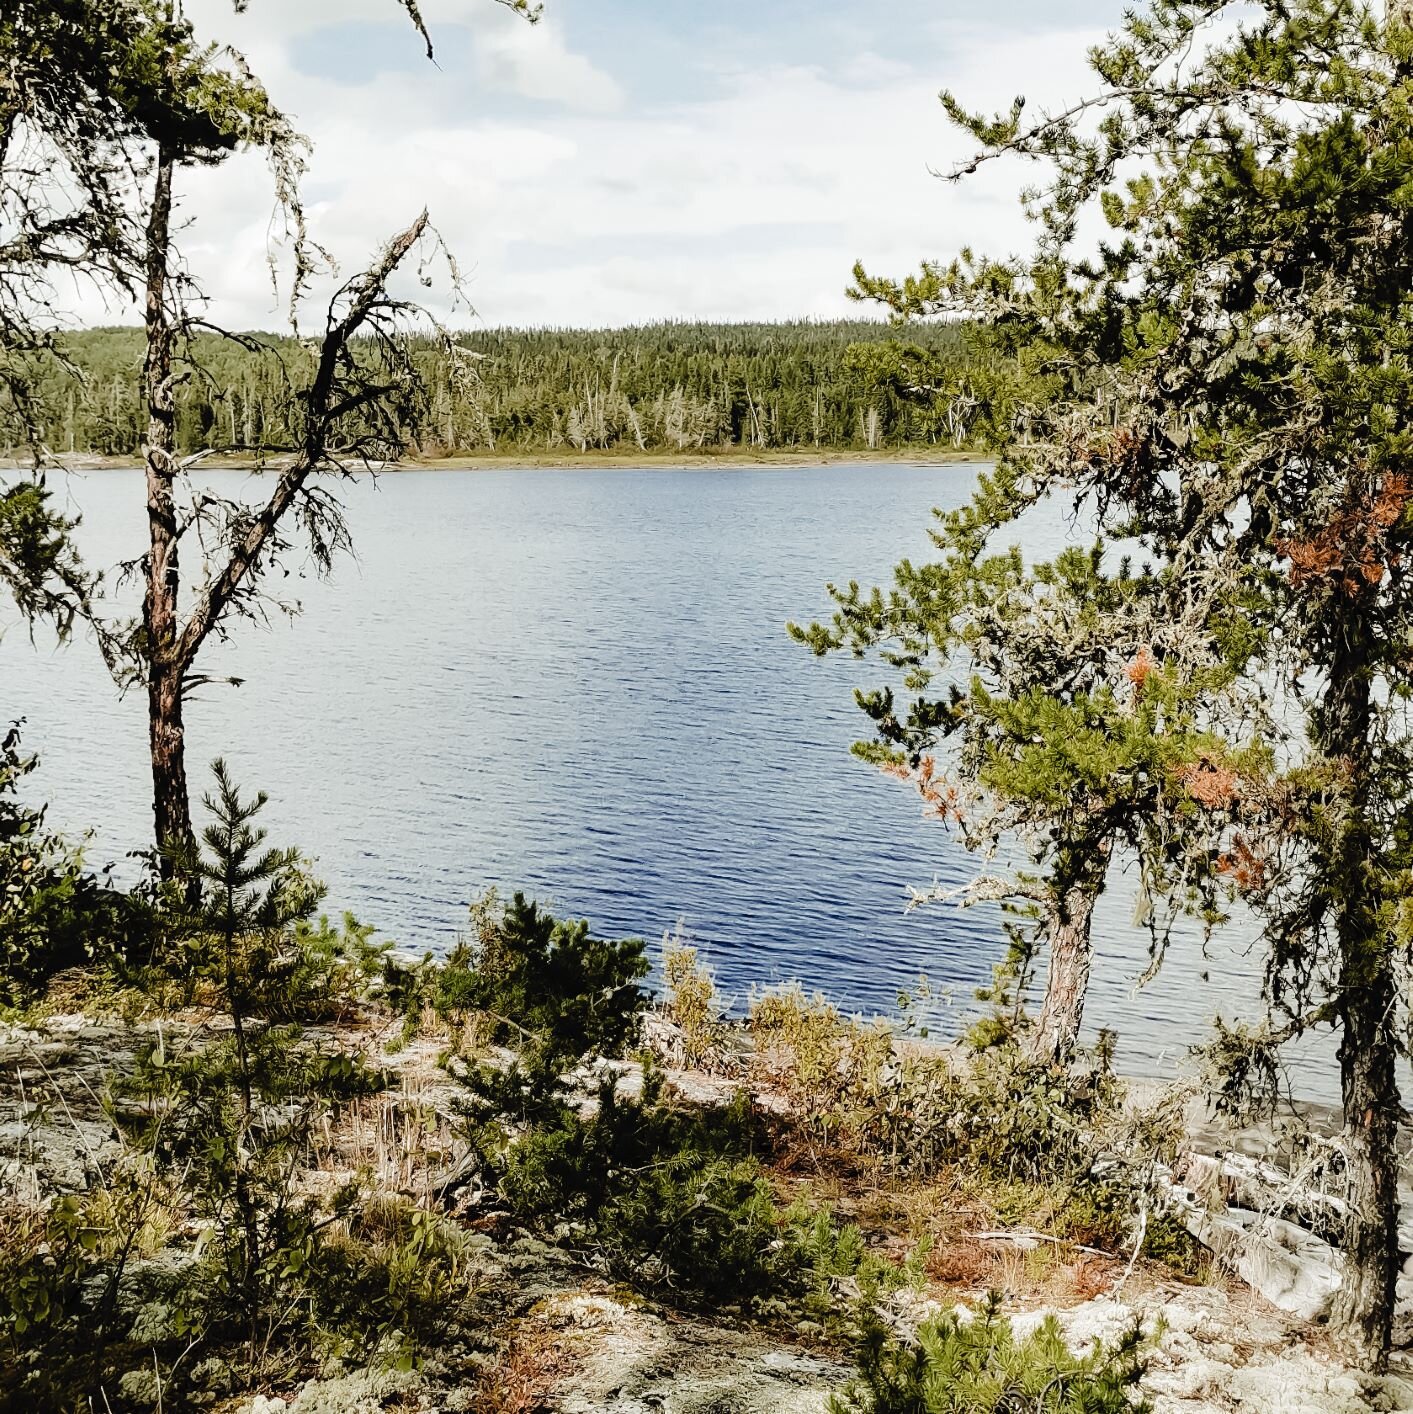 A boreal shoreline with a rock covered in scraggly vegetation leading down to a lake. The far shoreline is covered with evergreens.